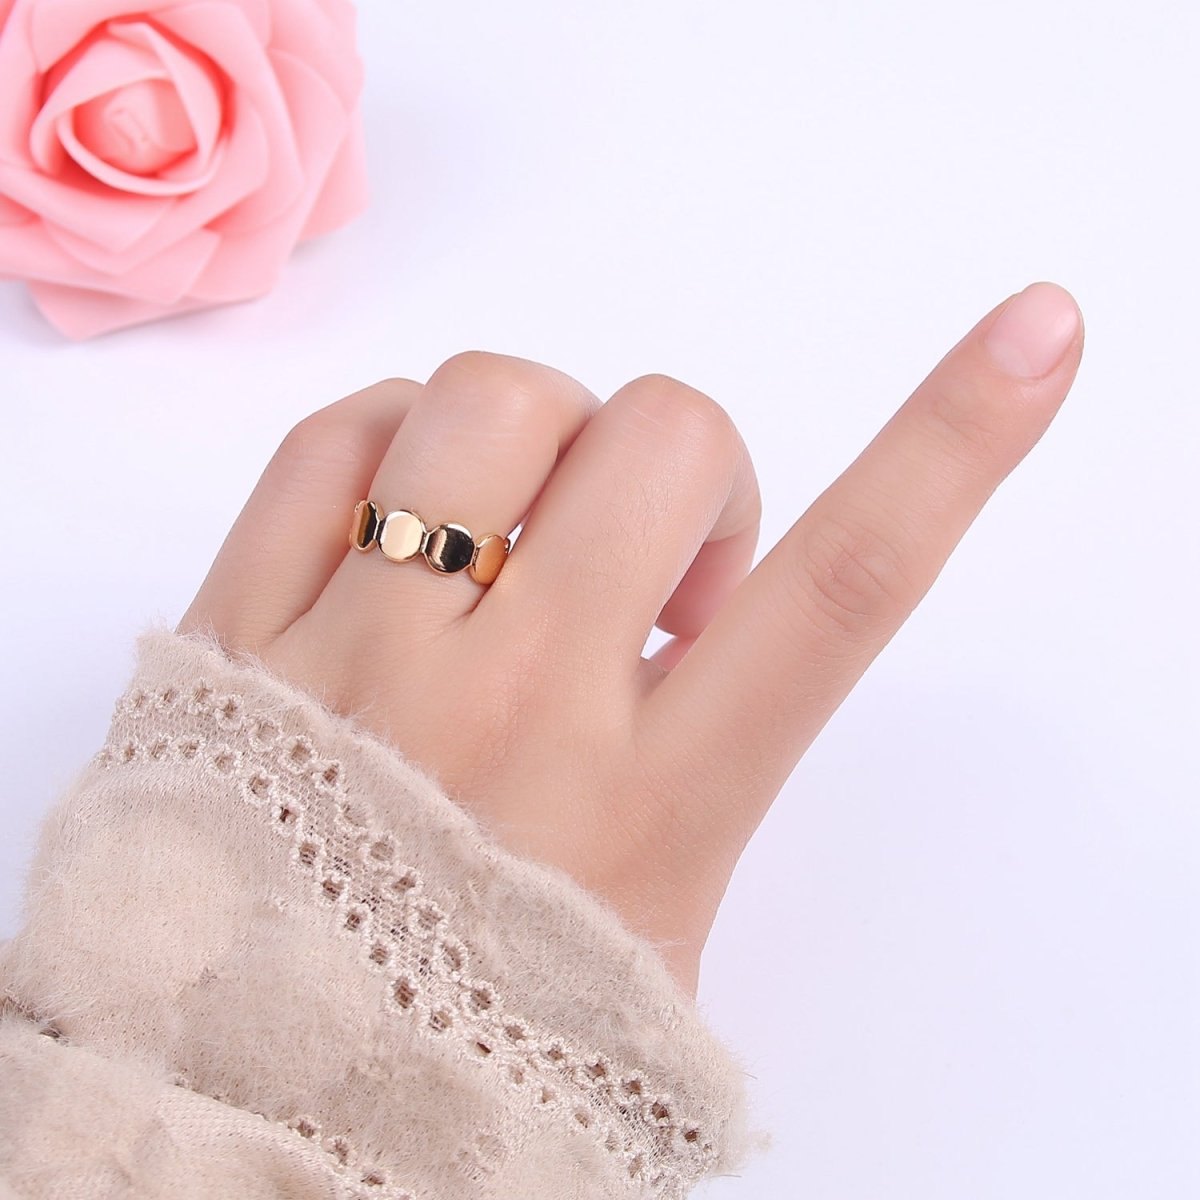 Minimalist Gold Geometric Abstract Stacking Ring, Adjustable Oval Round Circle Shaped Ring, Minimalist 16K Gold Filled Shiny Statement Adjustable Ring U-433 - DLUXCA